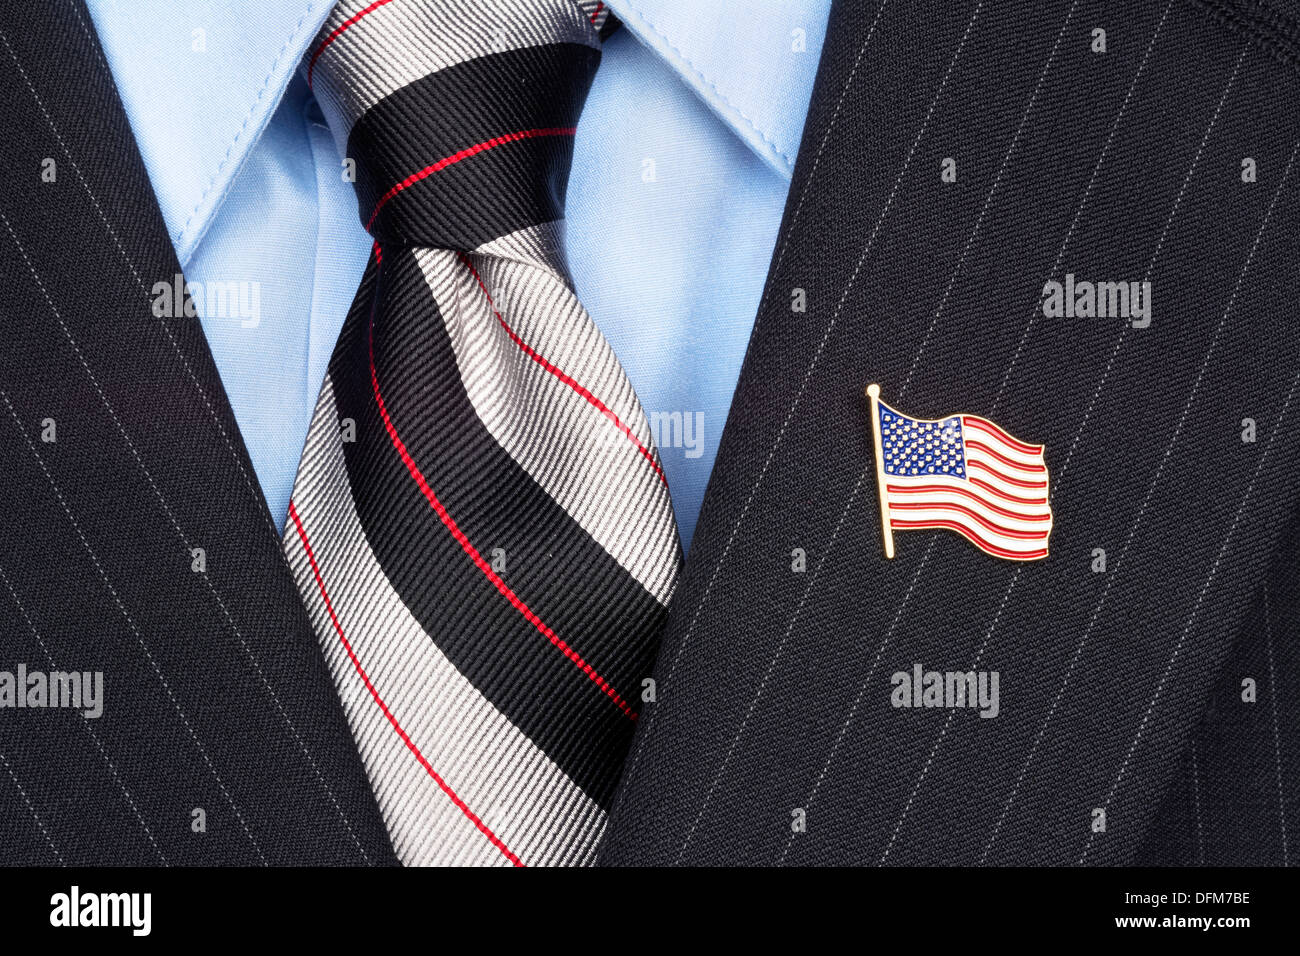 A symbolic American flag lapel pin on the collar of a businessman's suit Stock Photo